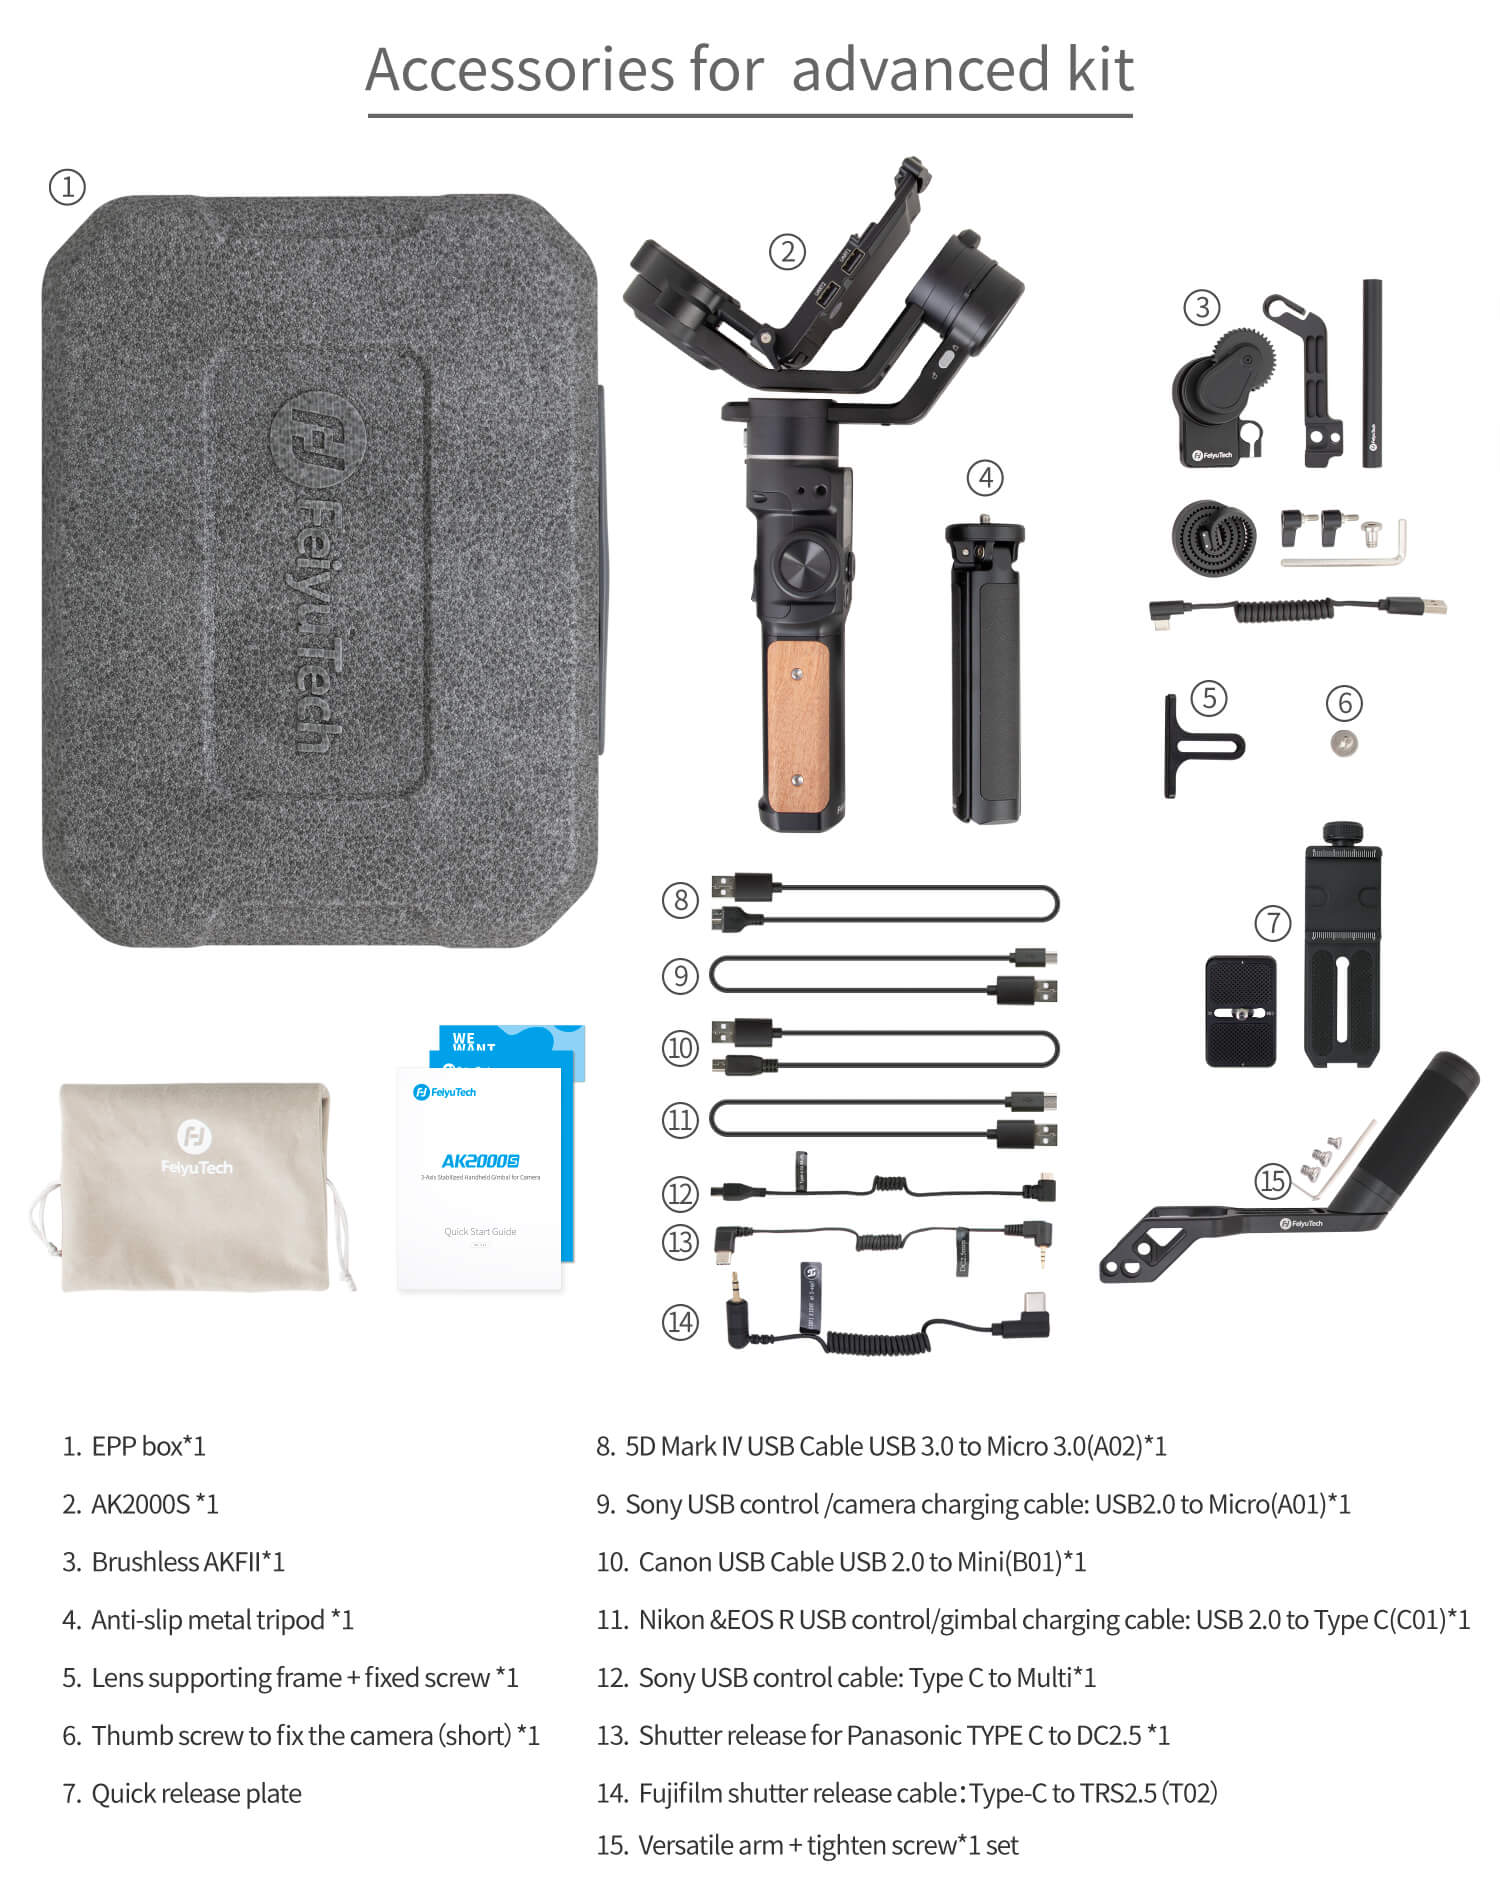 Accessories for standard kit